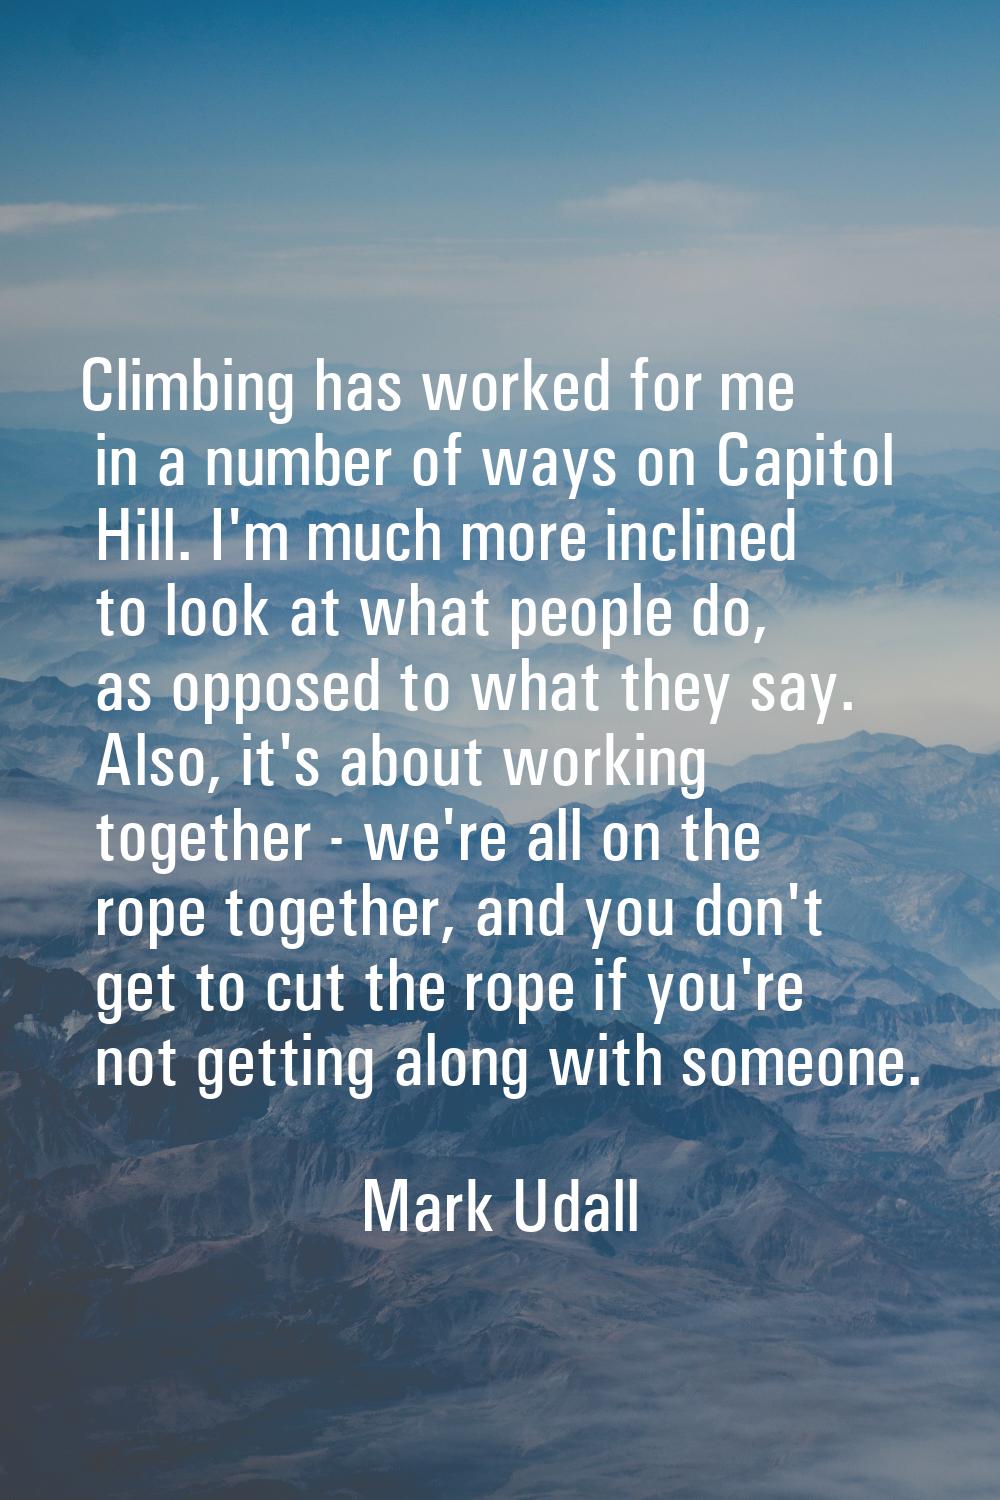 Climbing has worked for me in a number of ways on Capitol Hill. I'm much more inclined to look at w